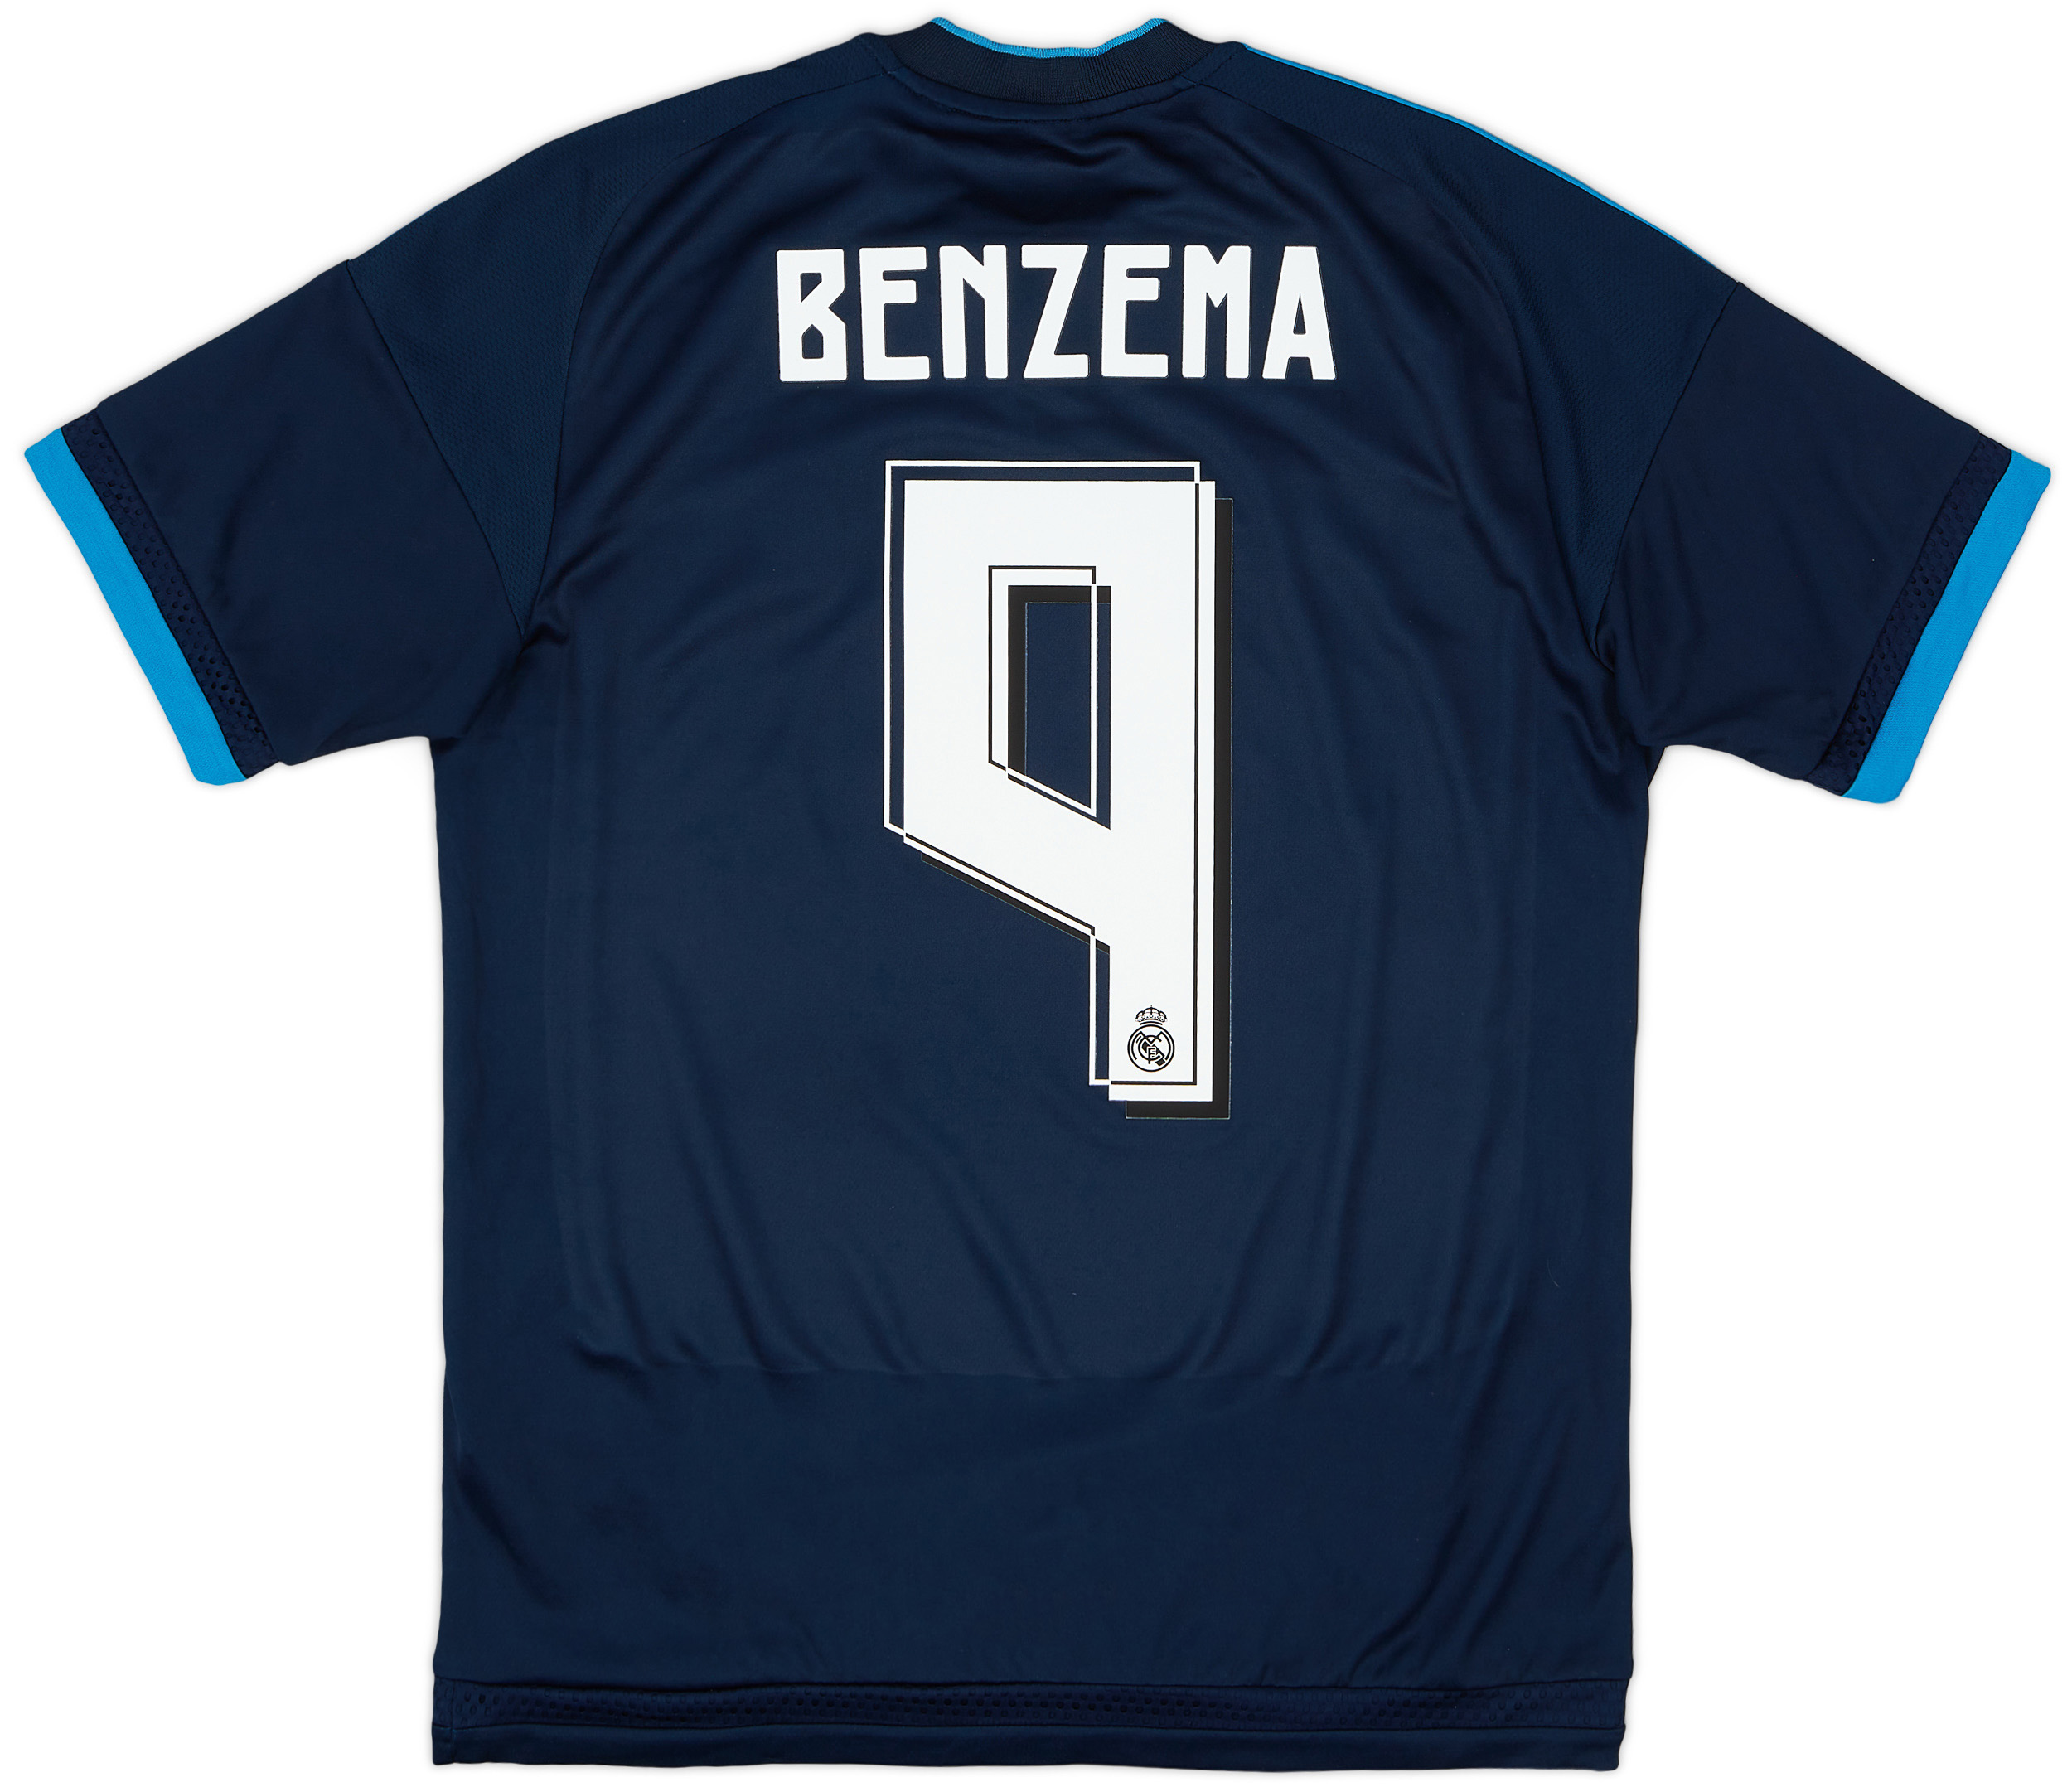 maillot real madrid benzema or